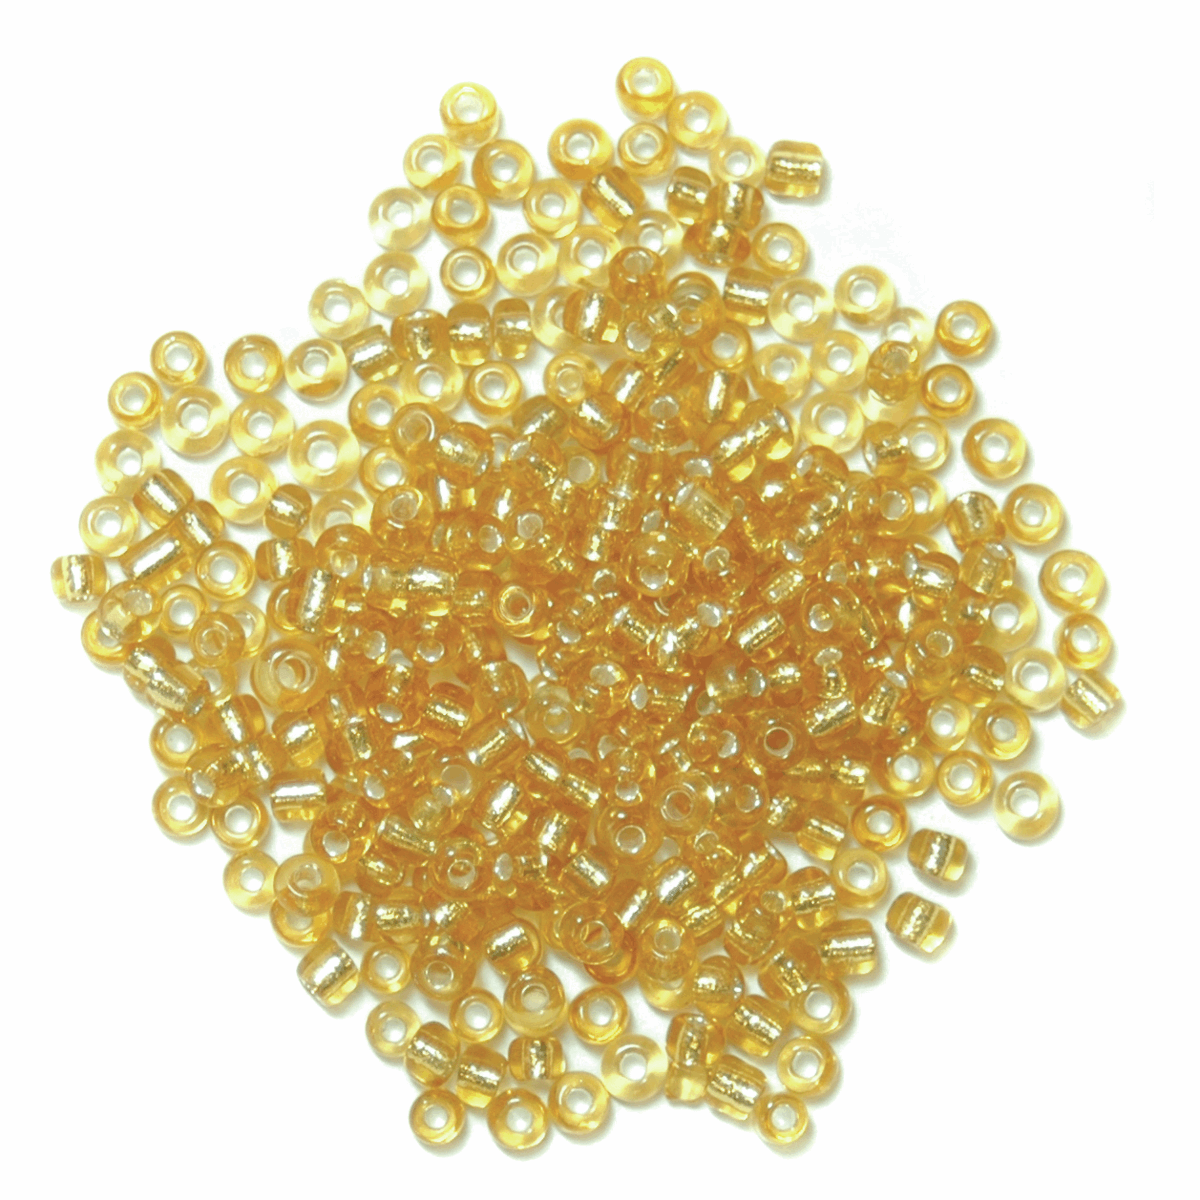 Trimits Gold Seed Beads - 8g Pack